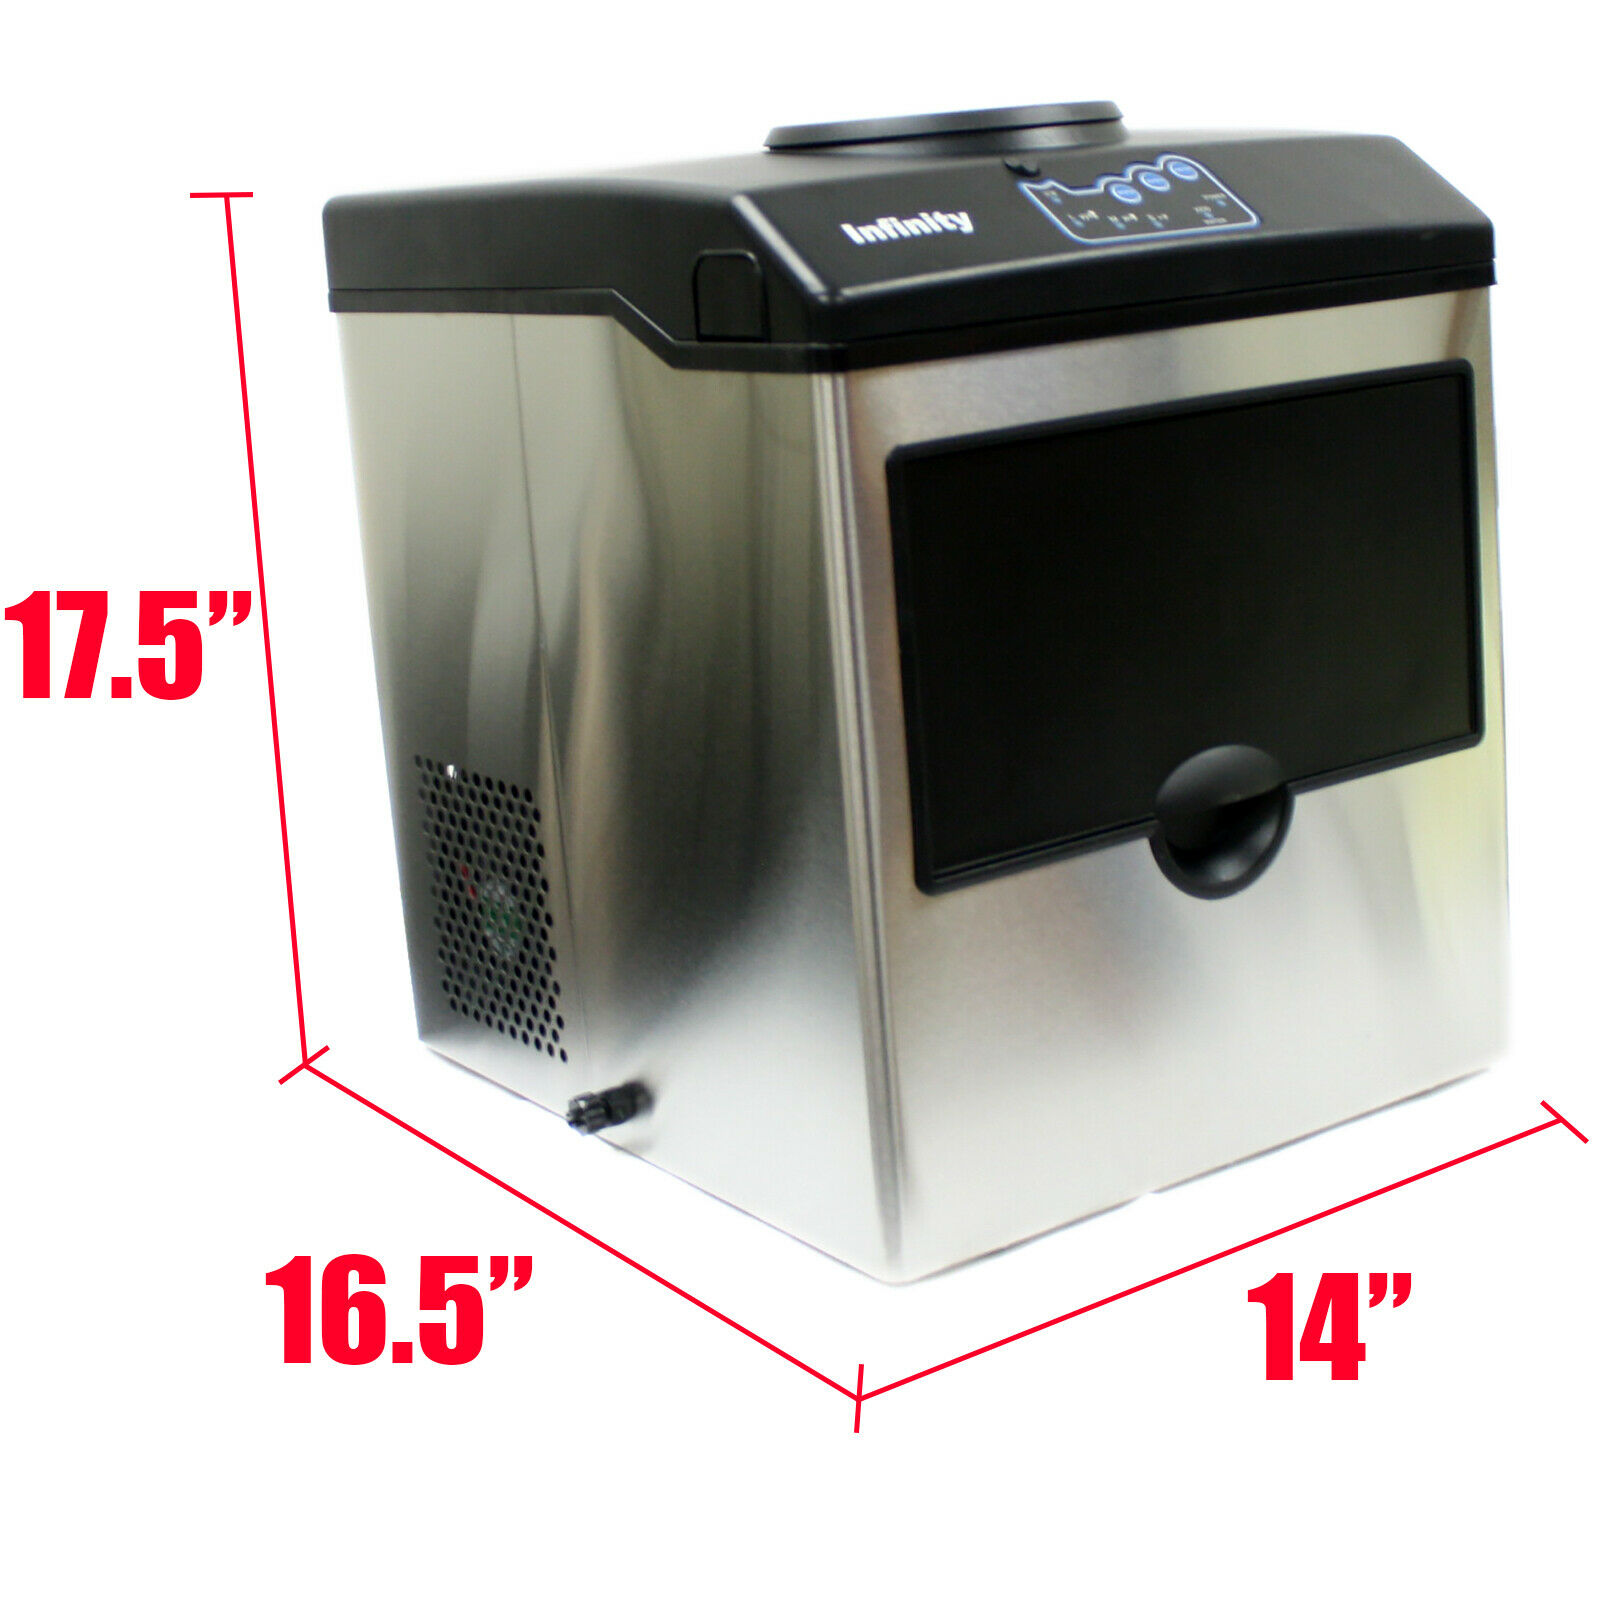 33 Lb/Day Table Top Ice Maker Making Machine Portable for 5 Gallon Water Bottle 